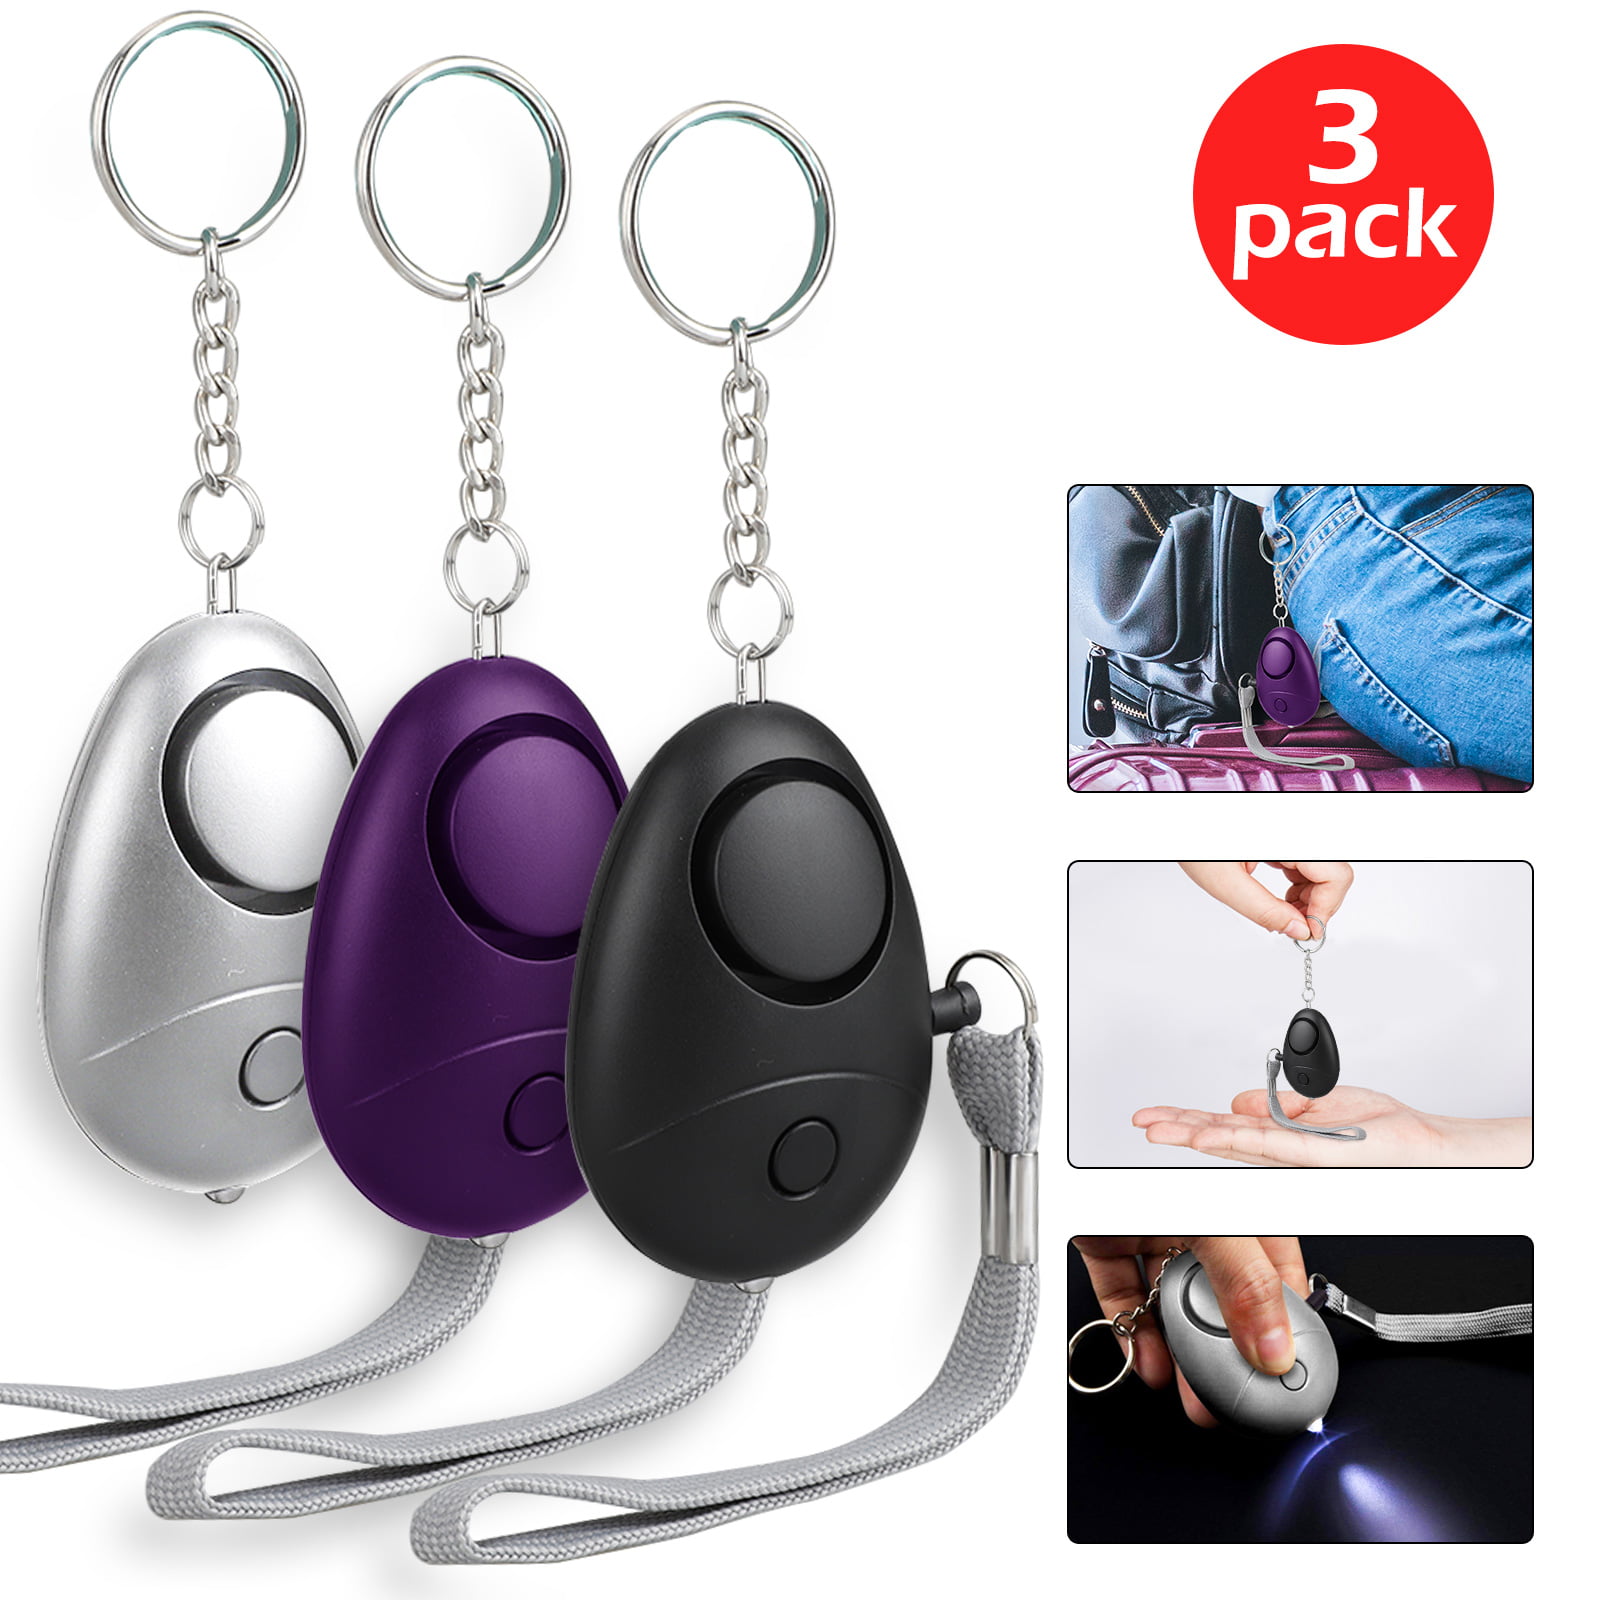 140DB Personal Alarm Keychain for Safety and Security